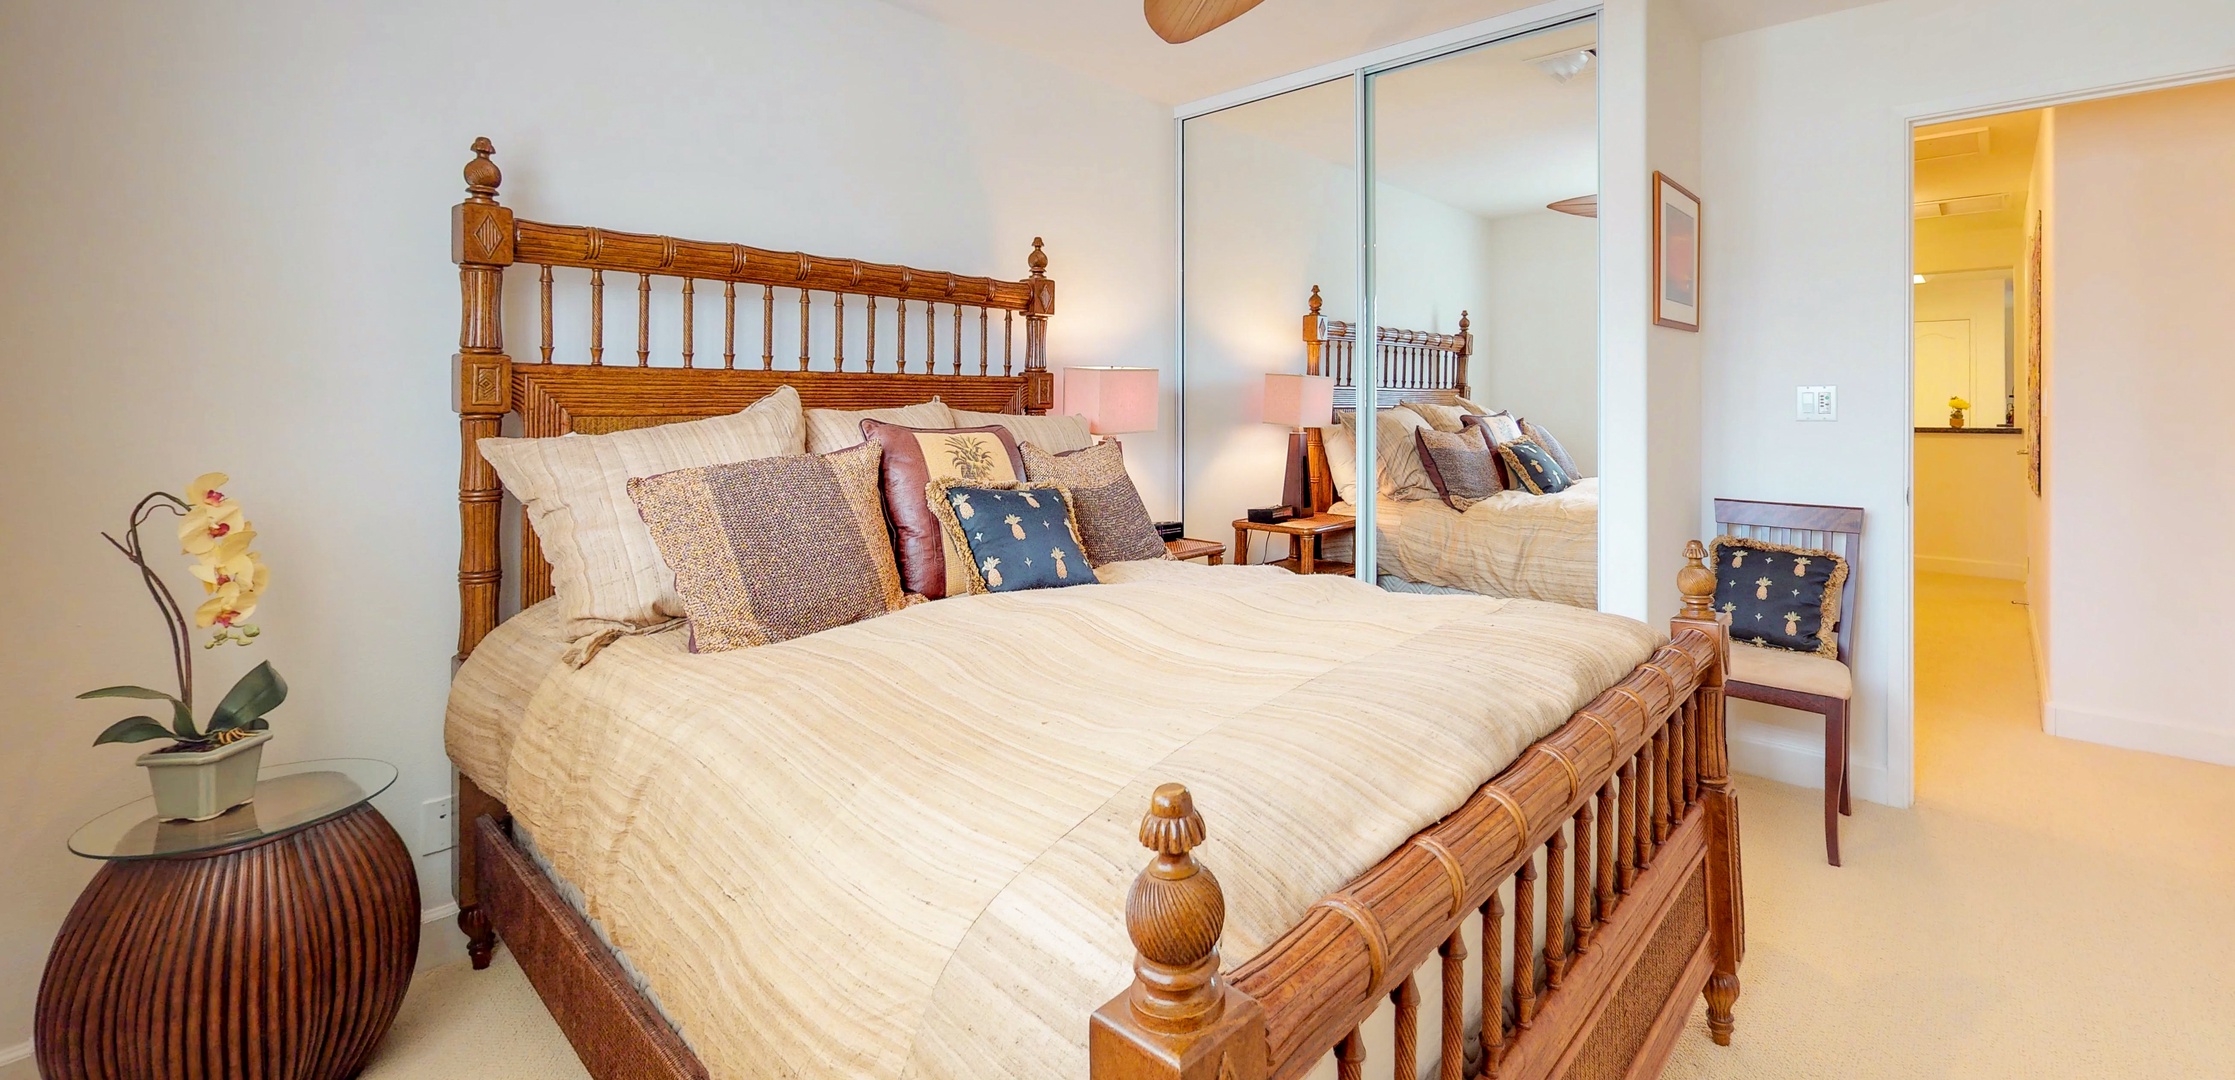 Kapolei Vacation Rentals, Ko Olina Kai 1105E - Guest bedroom features large bed and a mirror closet.